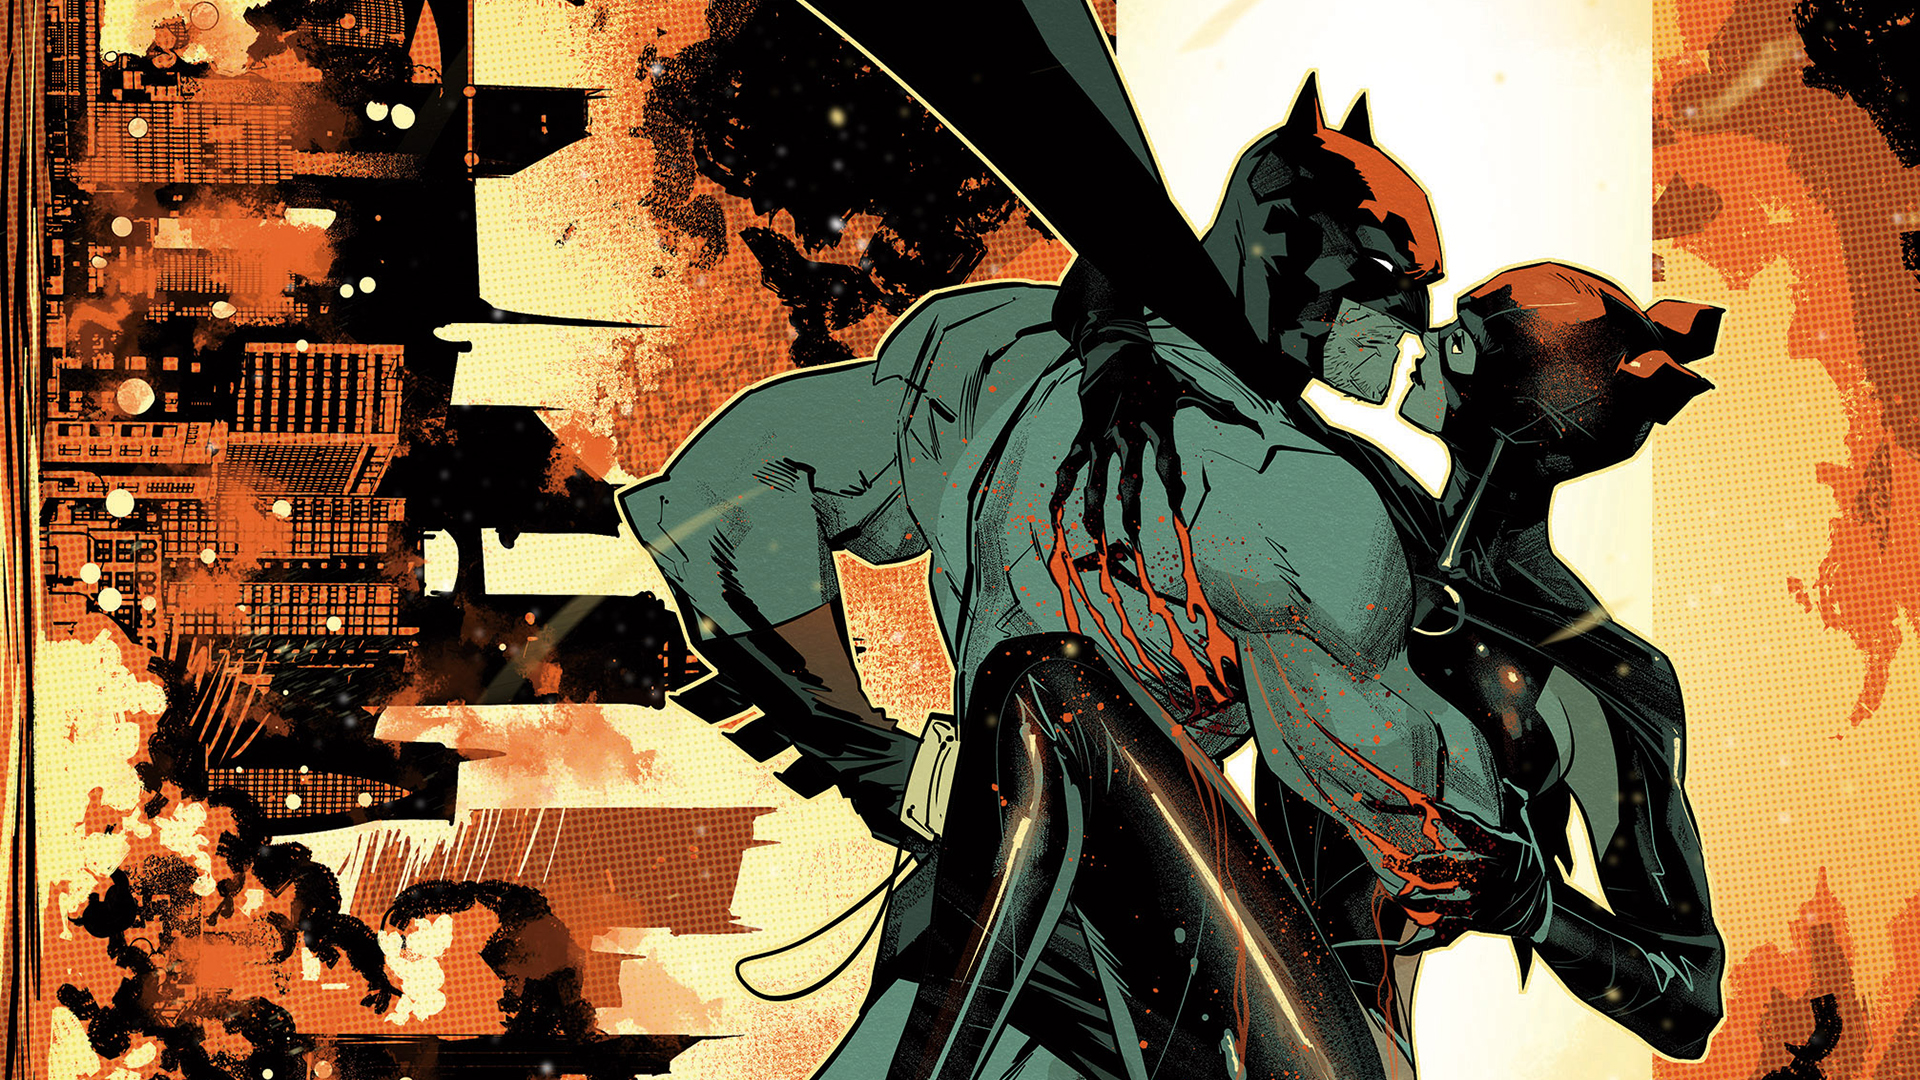 INTERVIEW: Joshua Williamson talks the long path of ROGUES